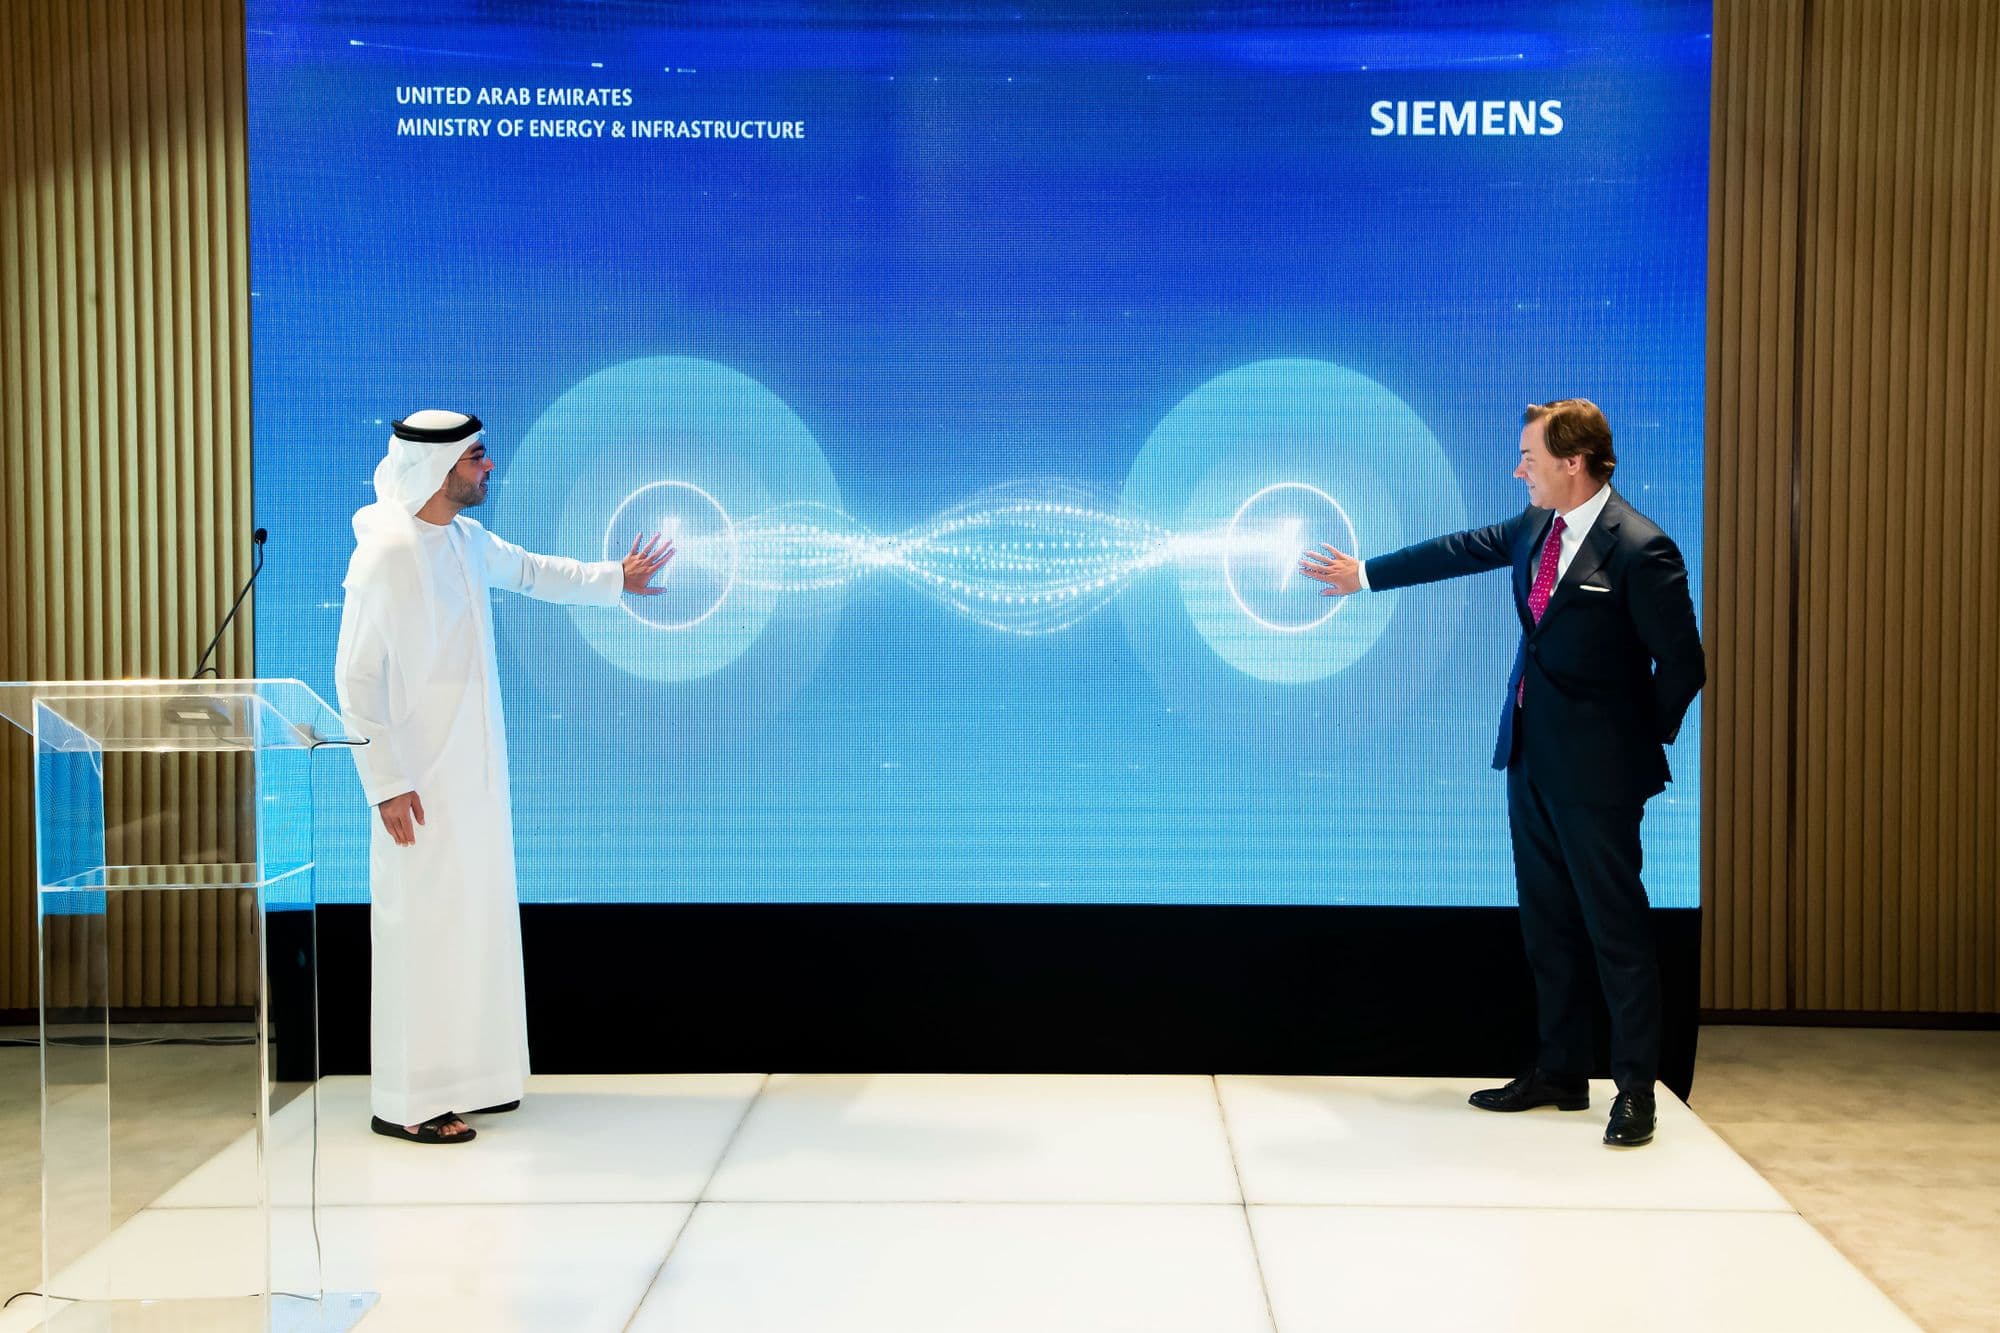 Siemens to Boost UAE Nationwide Network of EV Chargers